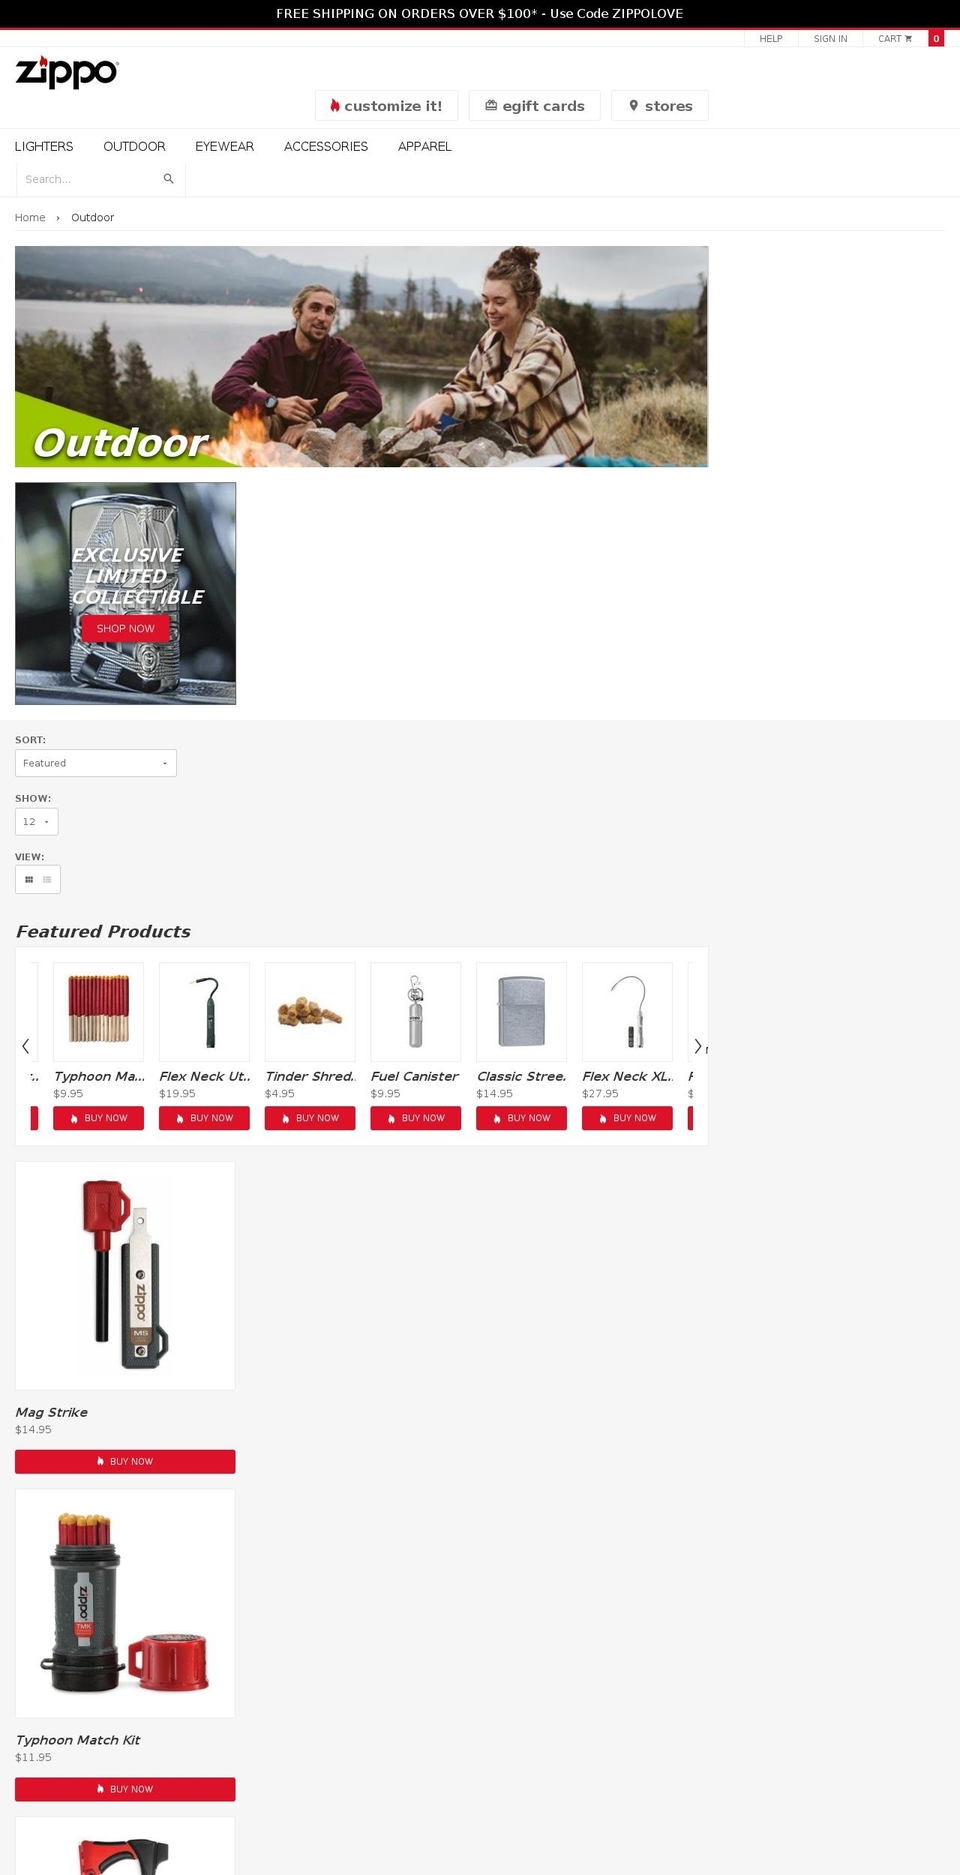 Shopify Checkout Update - 7\/16\/18 Shopify theme site example zippooutdoors.com